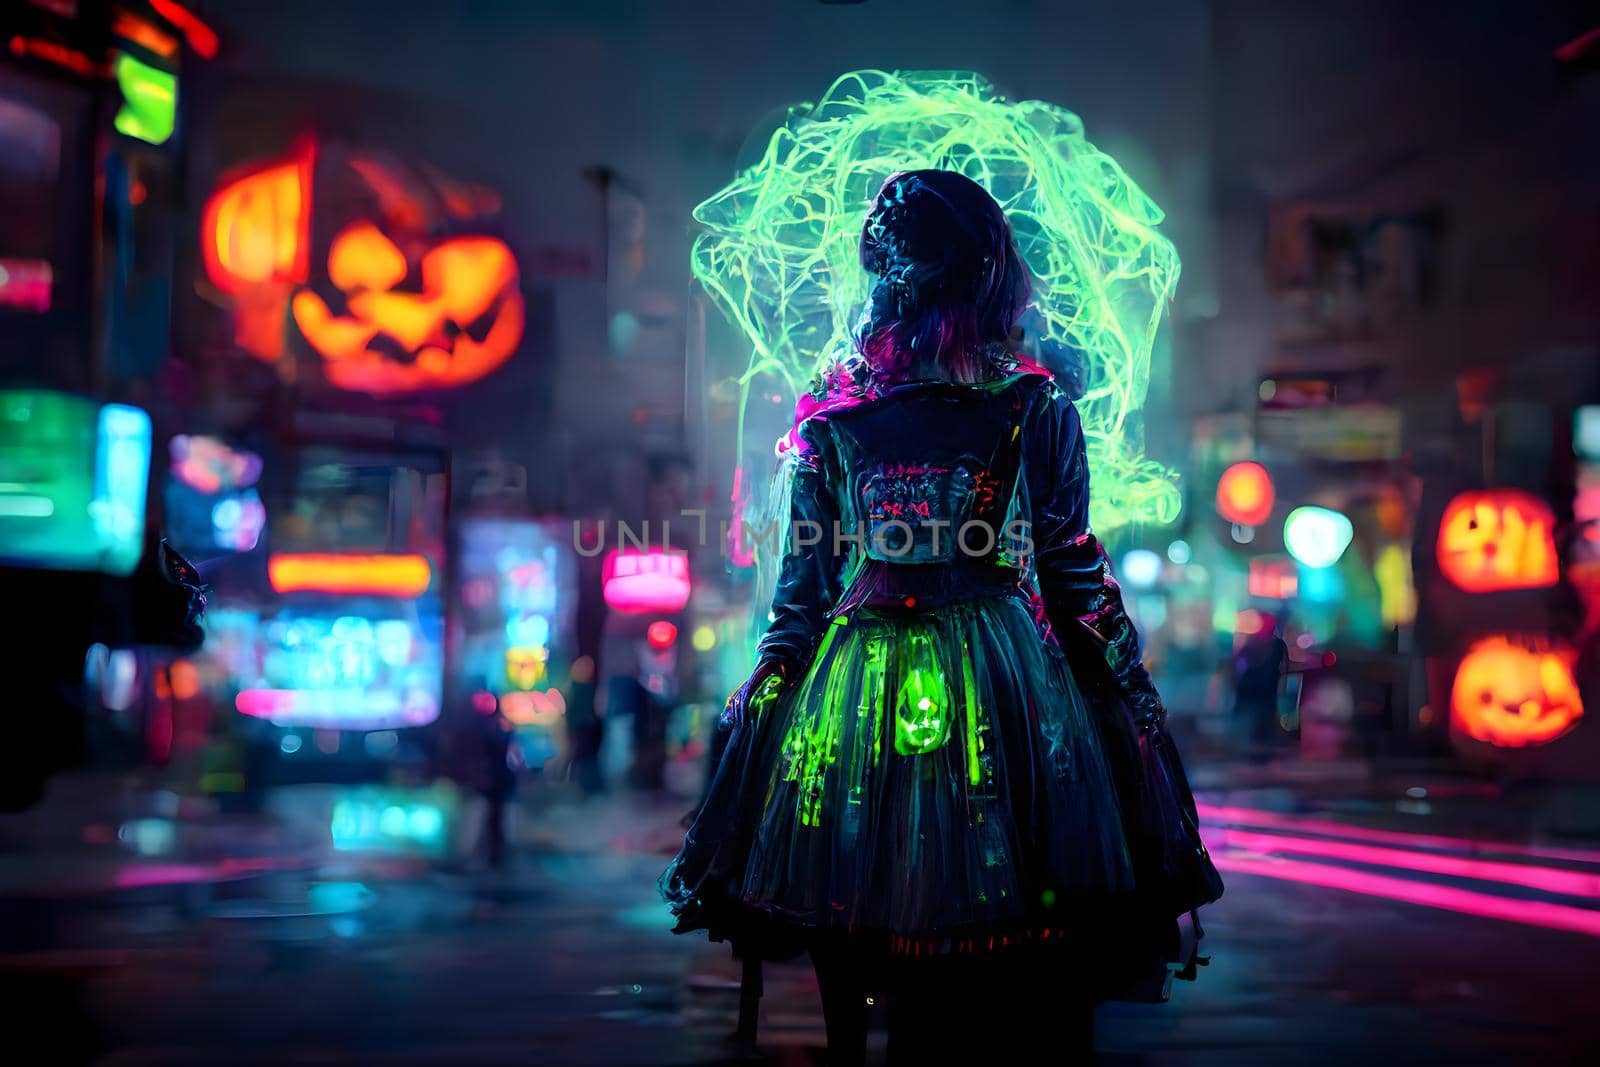 unrecognizable woman in halloween costume on neon illuminated night city street, neural network generated art. Digitally generated image. Not based on any actual scene or pattern.